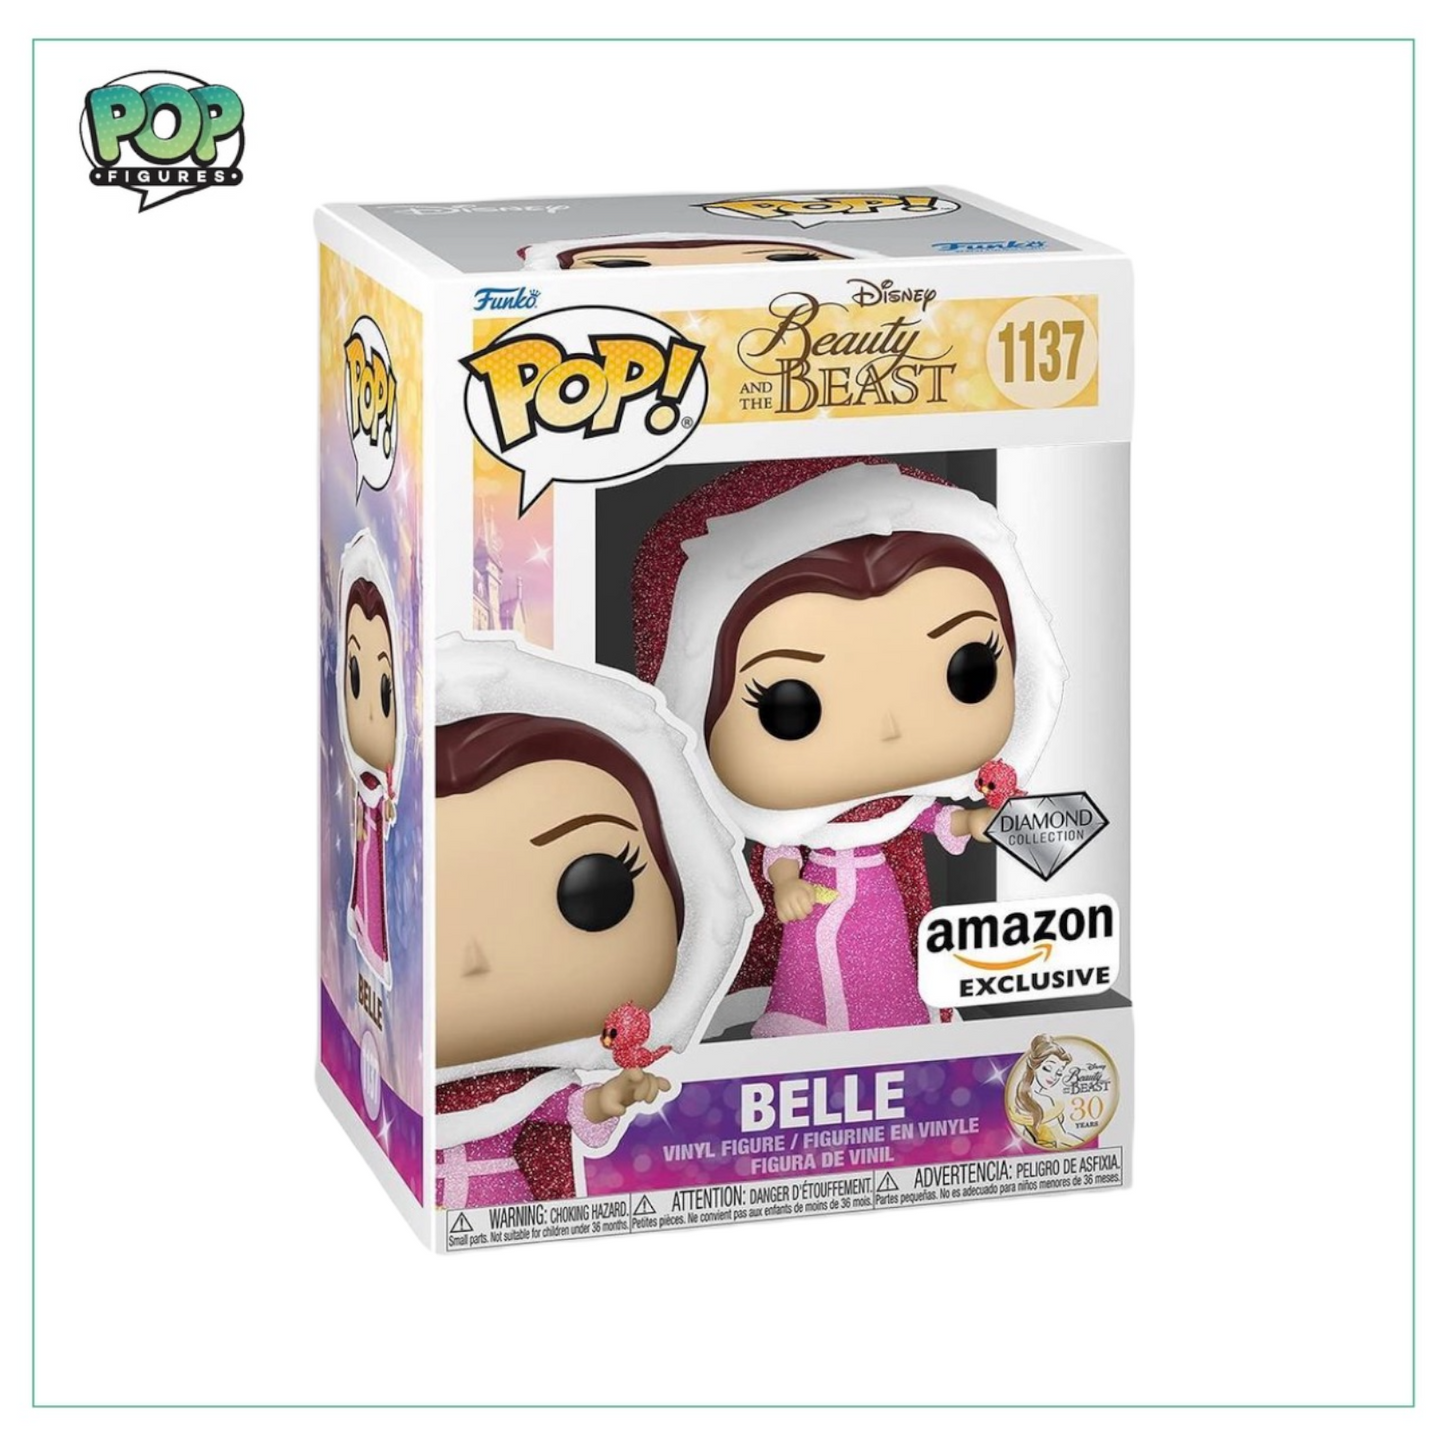 Belle (Diamond Collection) #1137 Funko Pop! Beauty and the Beast - Amazon Exclusive - Angry Cat